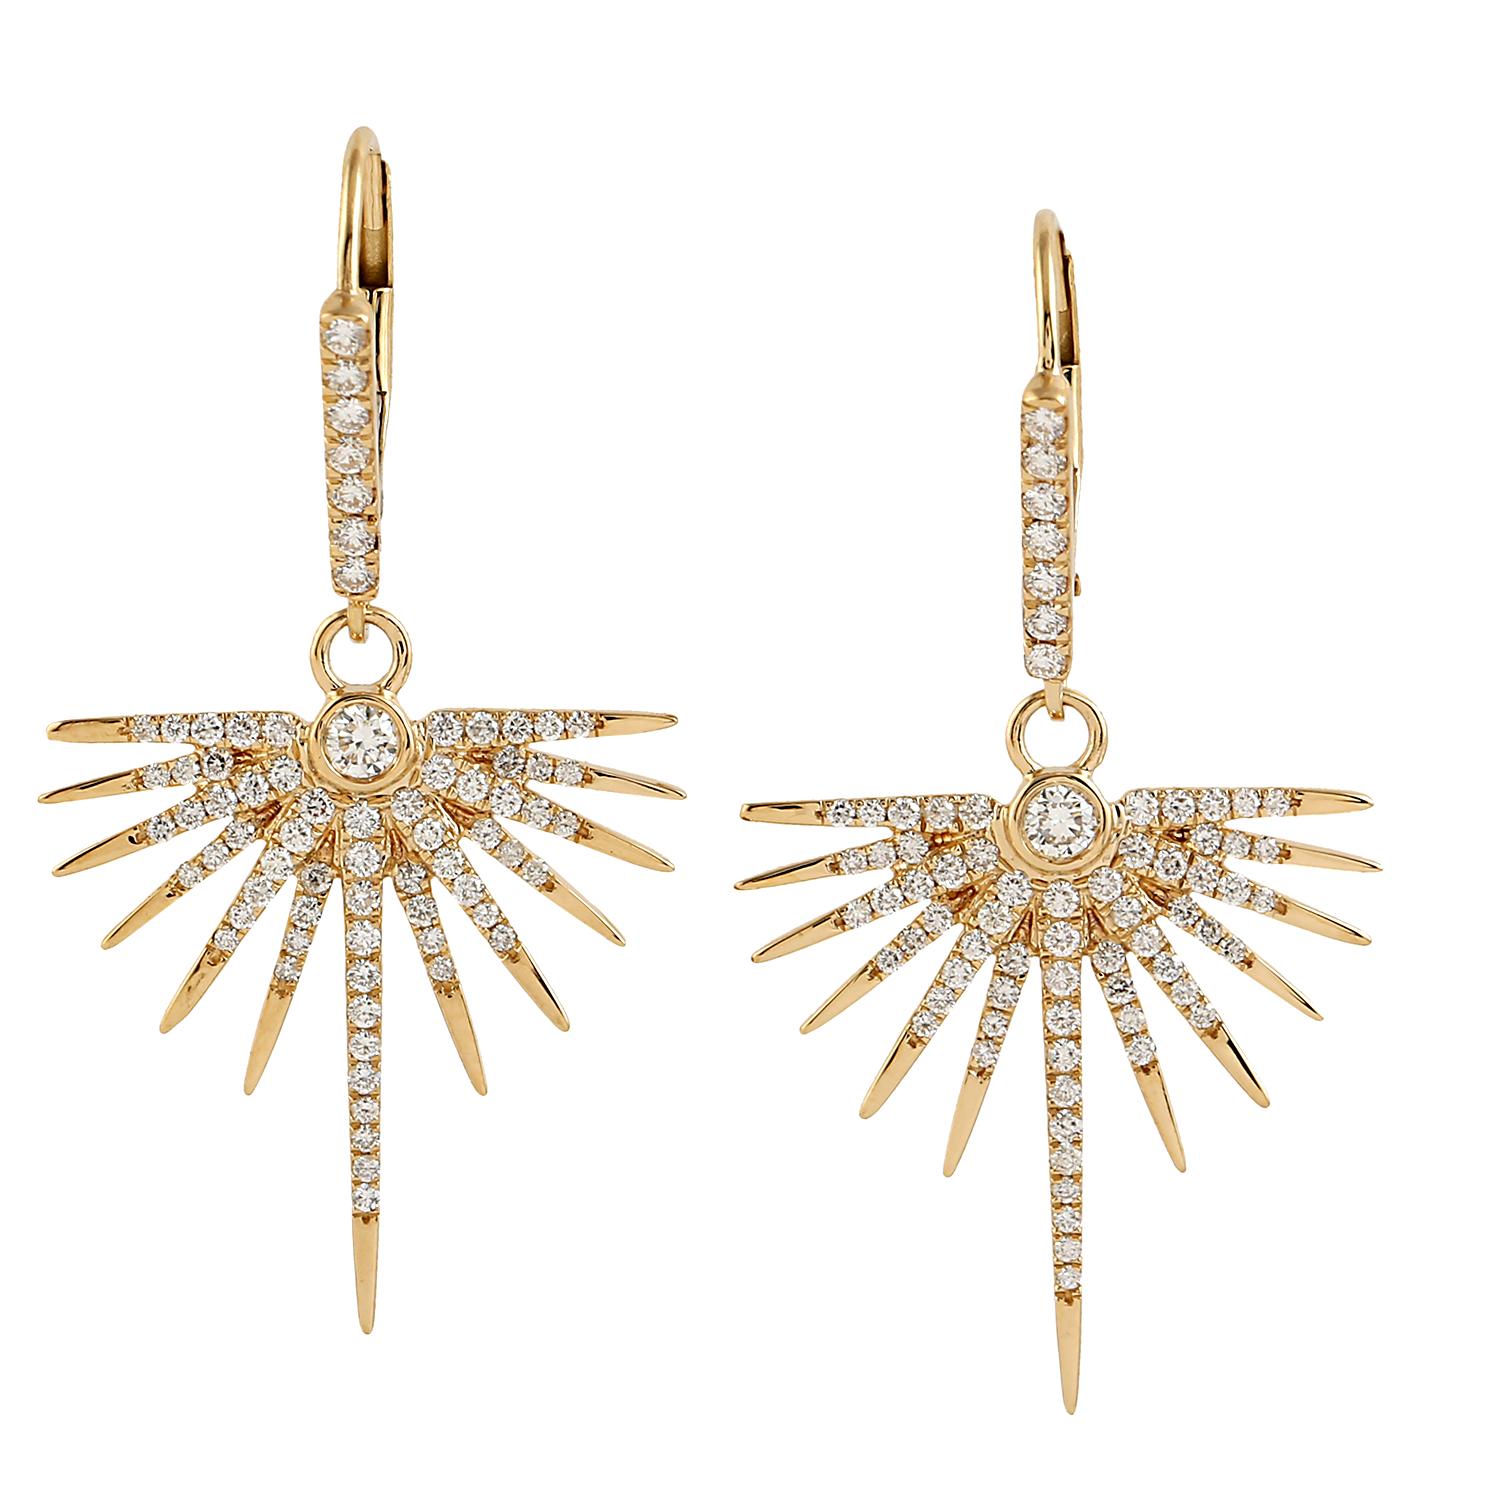 Sunburst Earrings With Diamonds Made In 18k Yellow Gold In New Condition For Sale In New York, NY